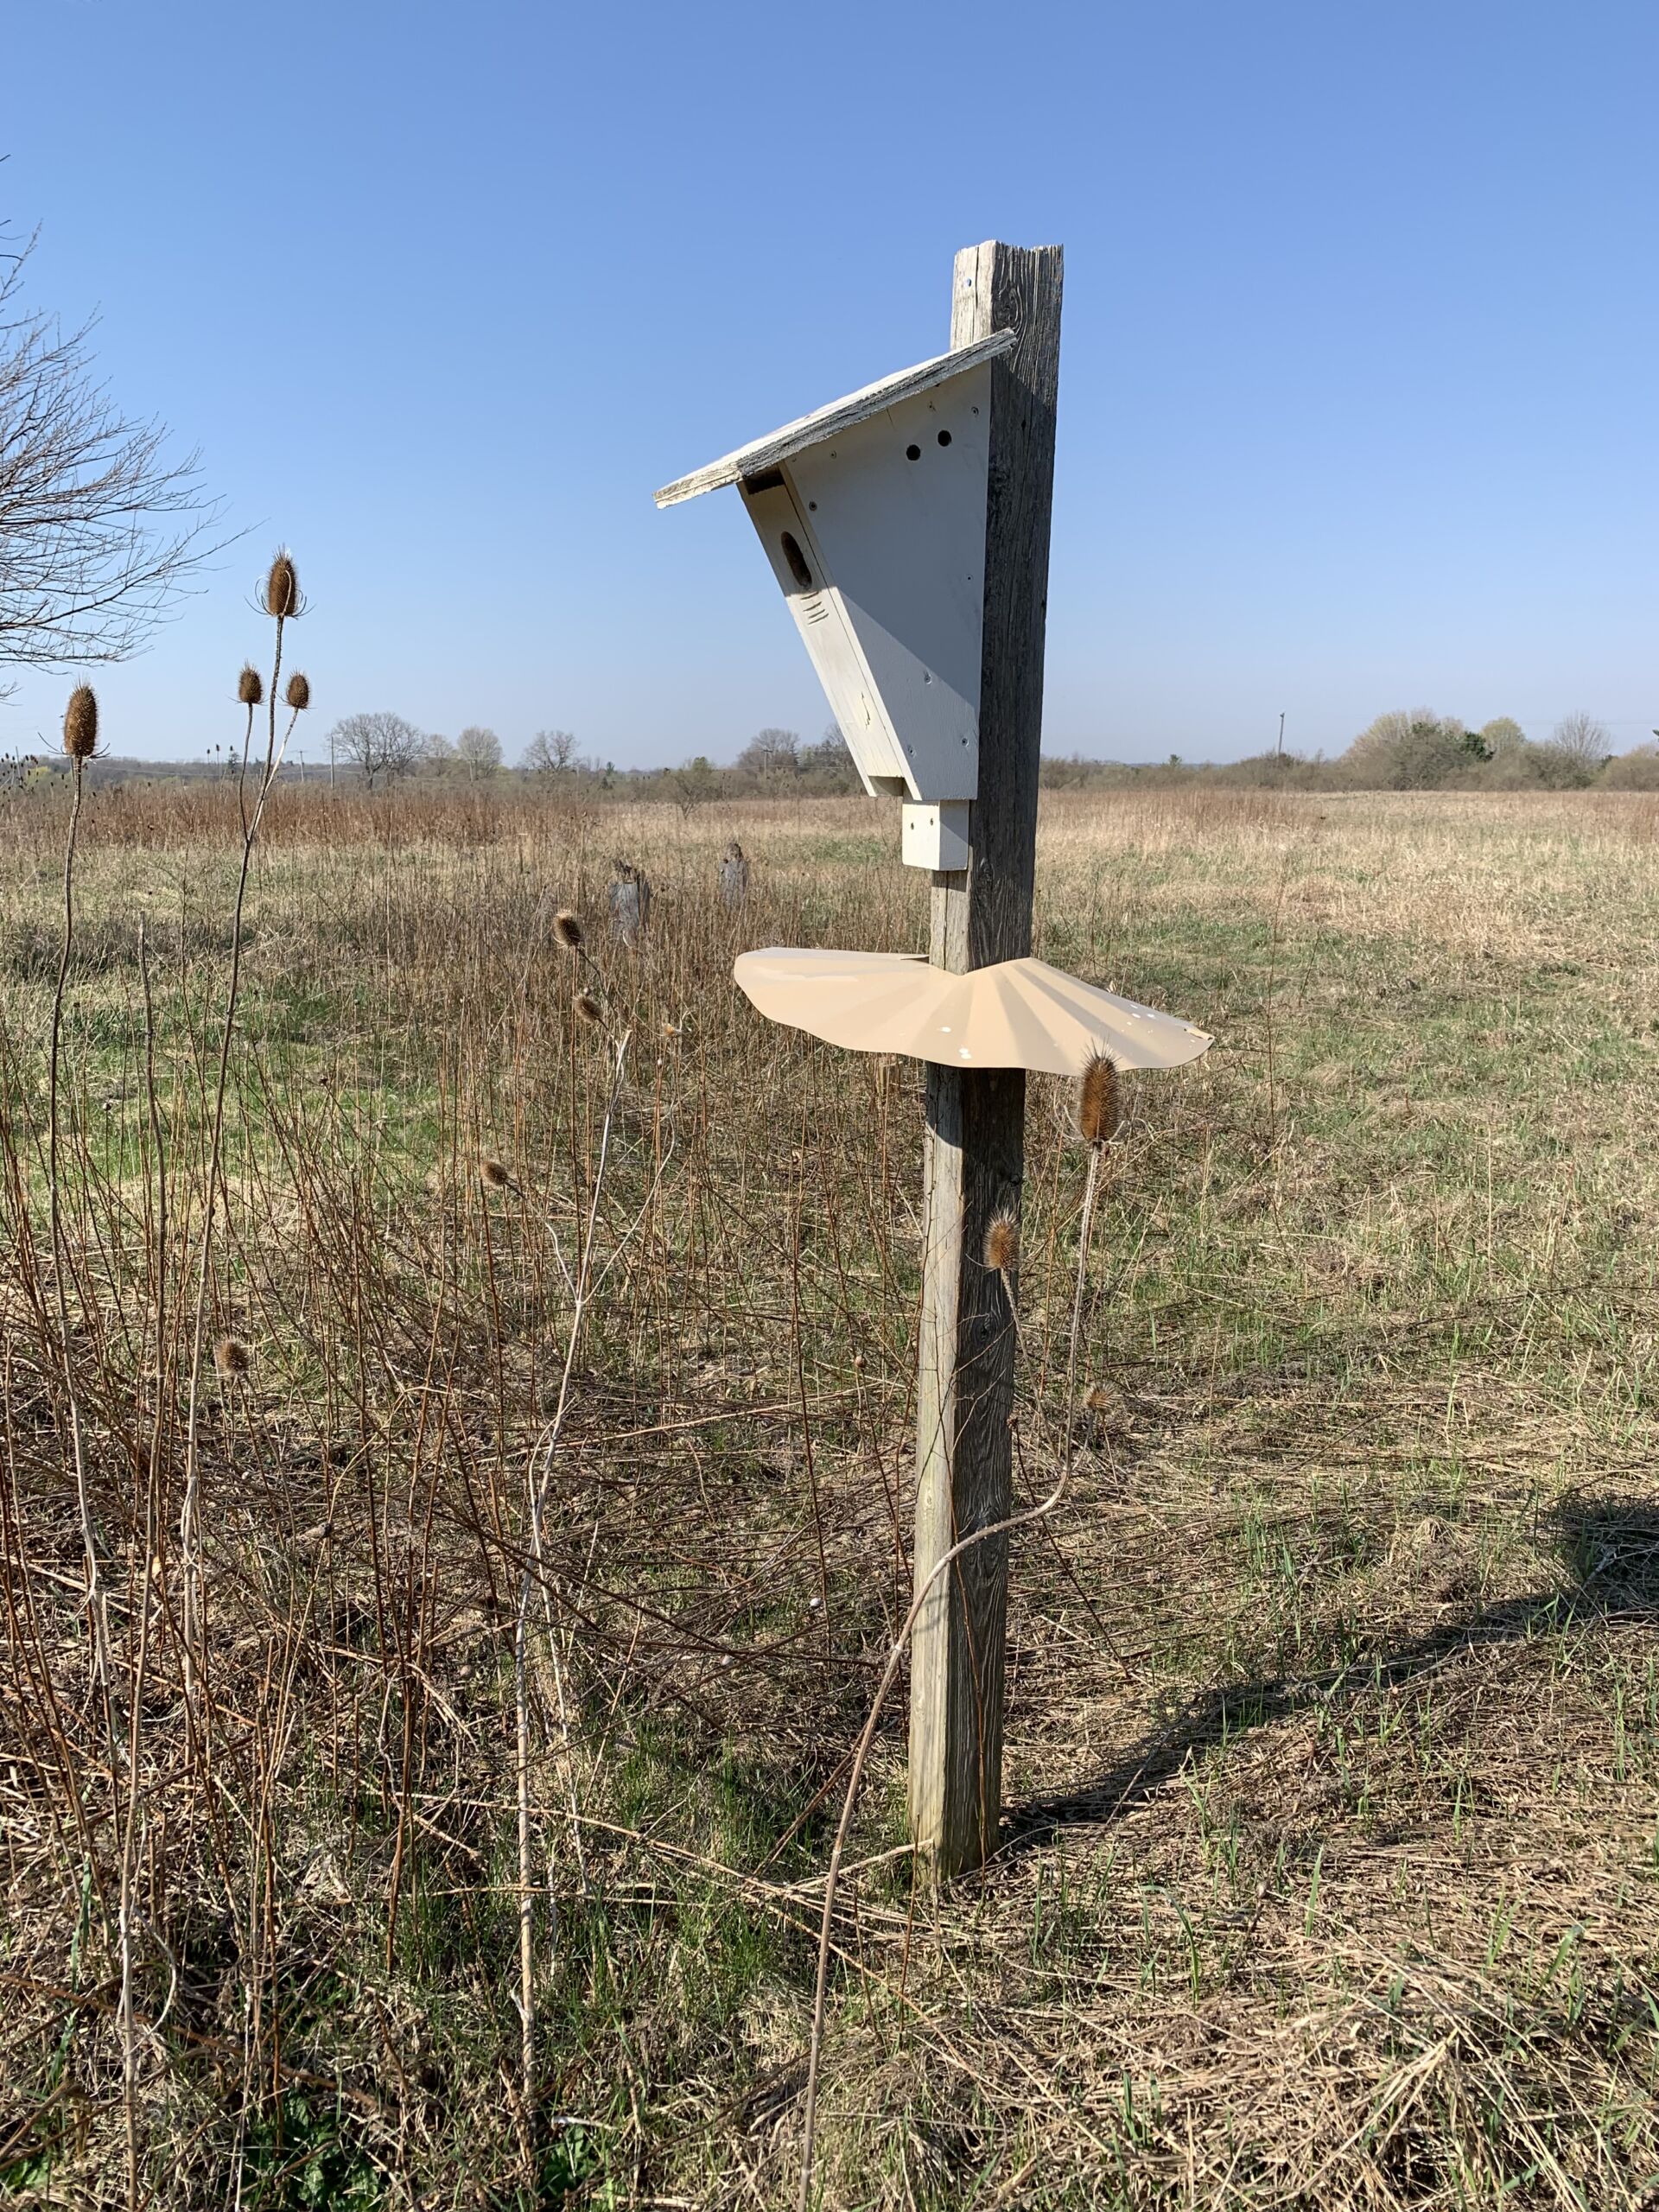 The side profile of a bird box in a field.